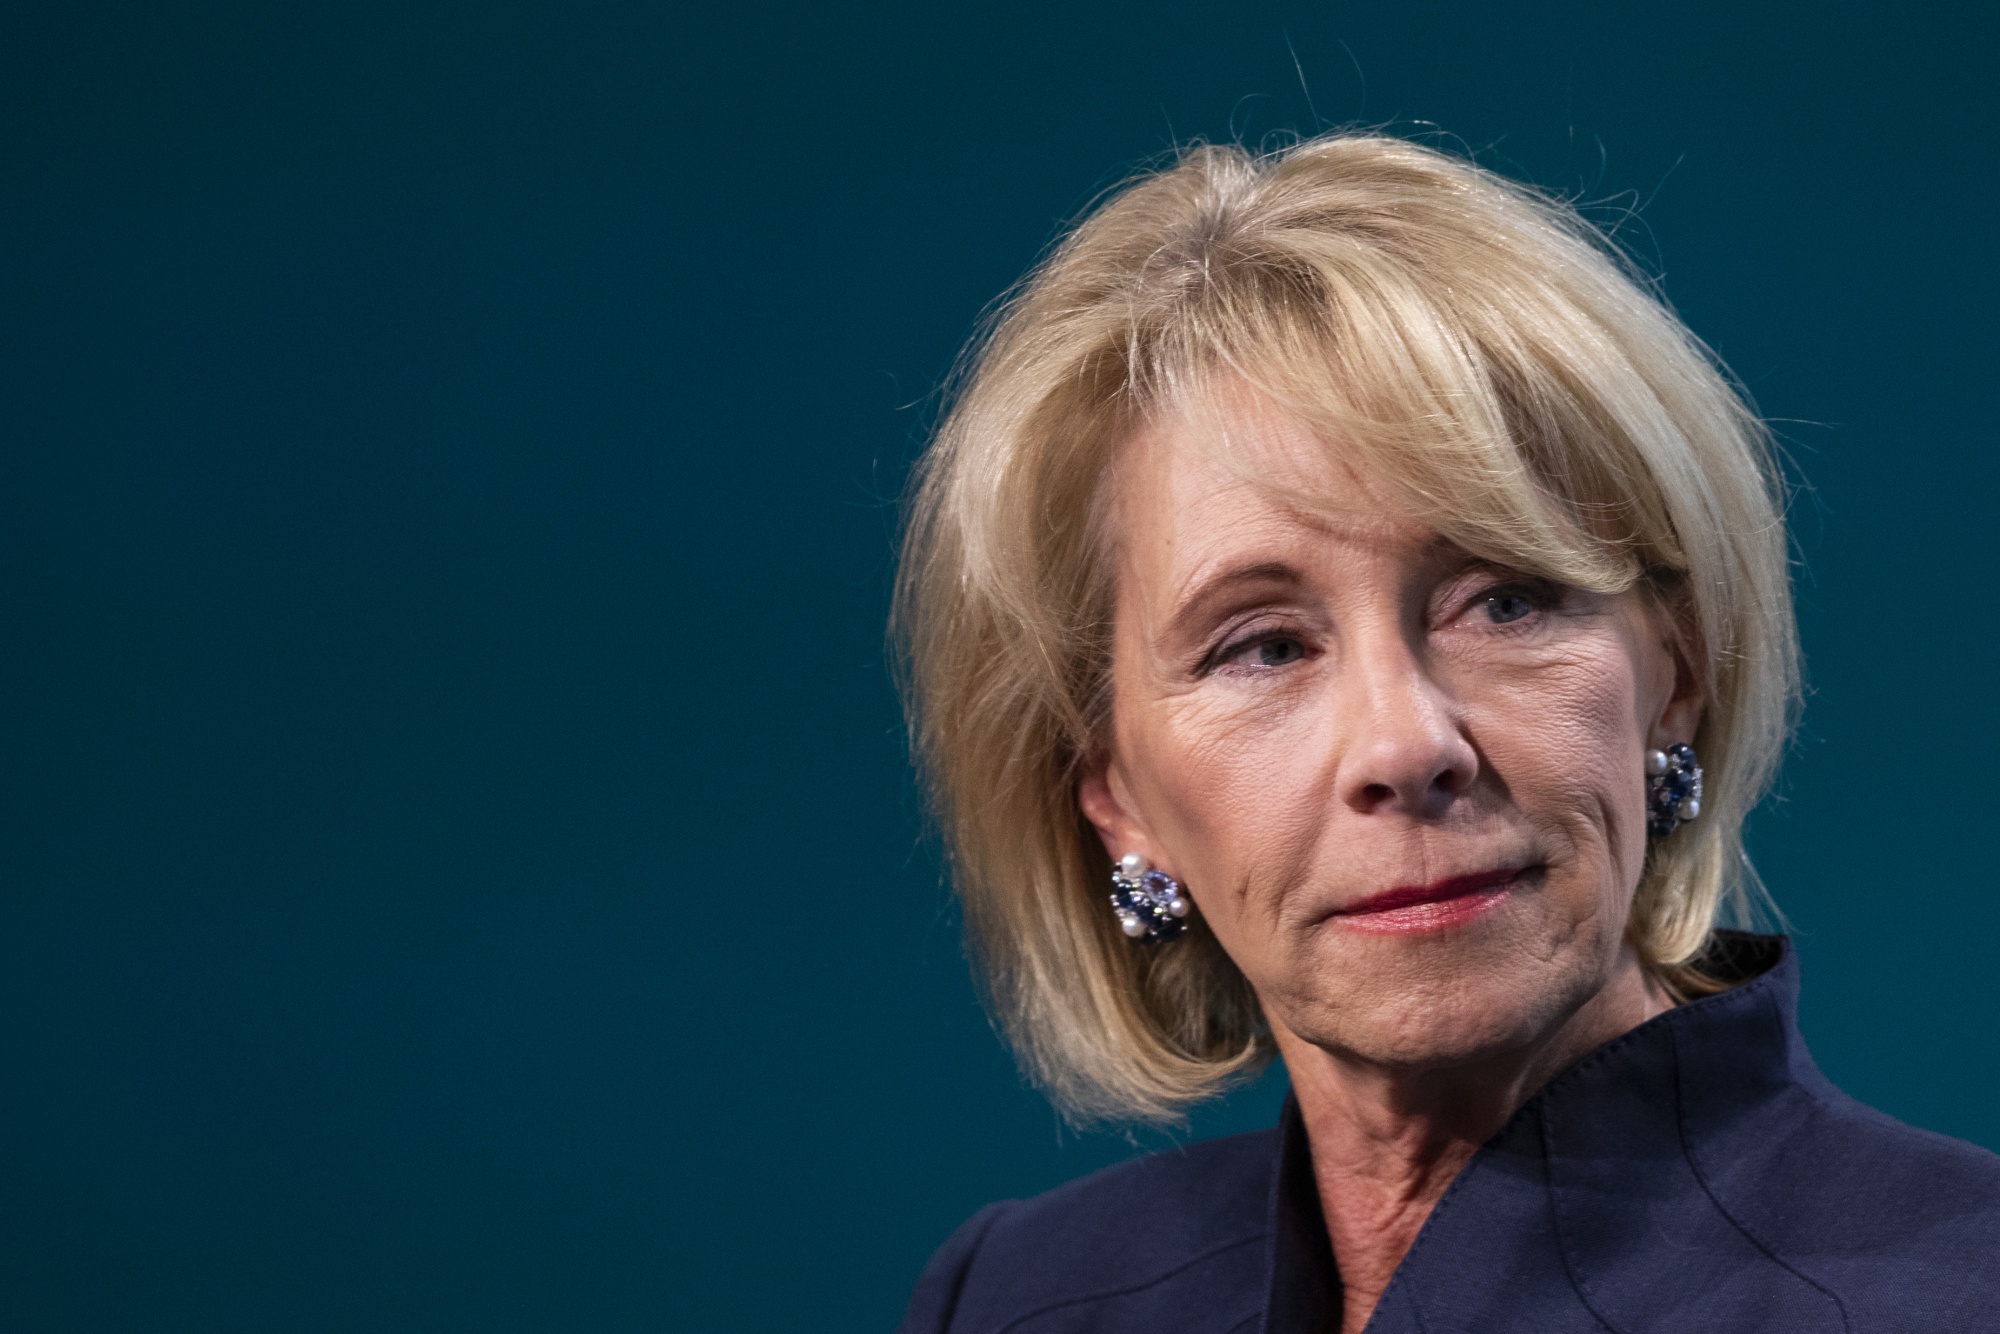 Betsy DeVos, secretary of education, appears at a conference in Washington on June 11.